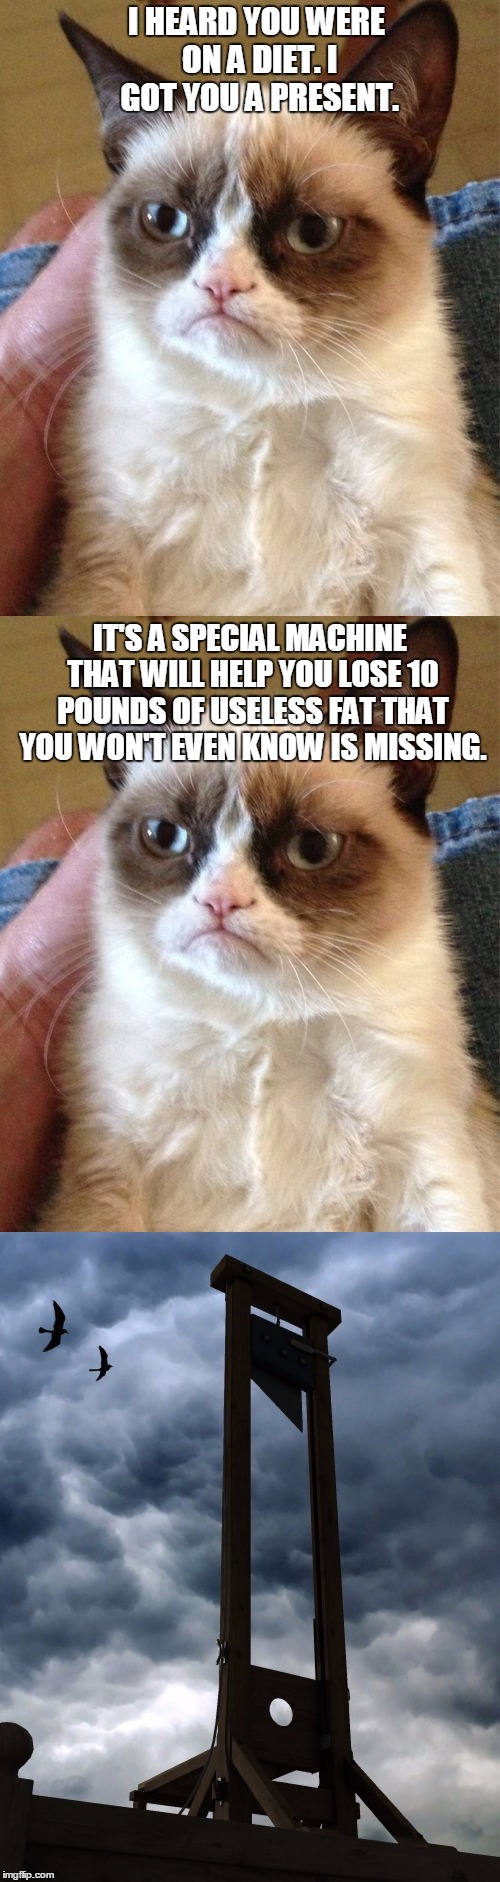 Grumpy Cat is feeling generous |  I HEARD YOU WERE ON A DIET. I GOT YOU A PRESENT. IT'S A SPECIAL MACHINE THAT WILL HELP YOU LOSE 10 POUNDS OF USELESS FAT THAT YOU WON'T EVEN KNOW IS MISSING. | image tagged in memes,grumpy cat,new feature,guillotine,maim,grumpy cat weight loss program | made w/ Imgflip meme maker